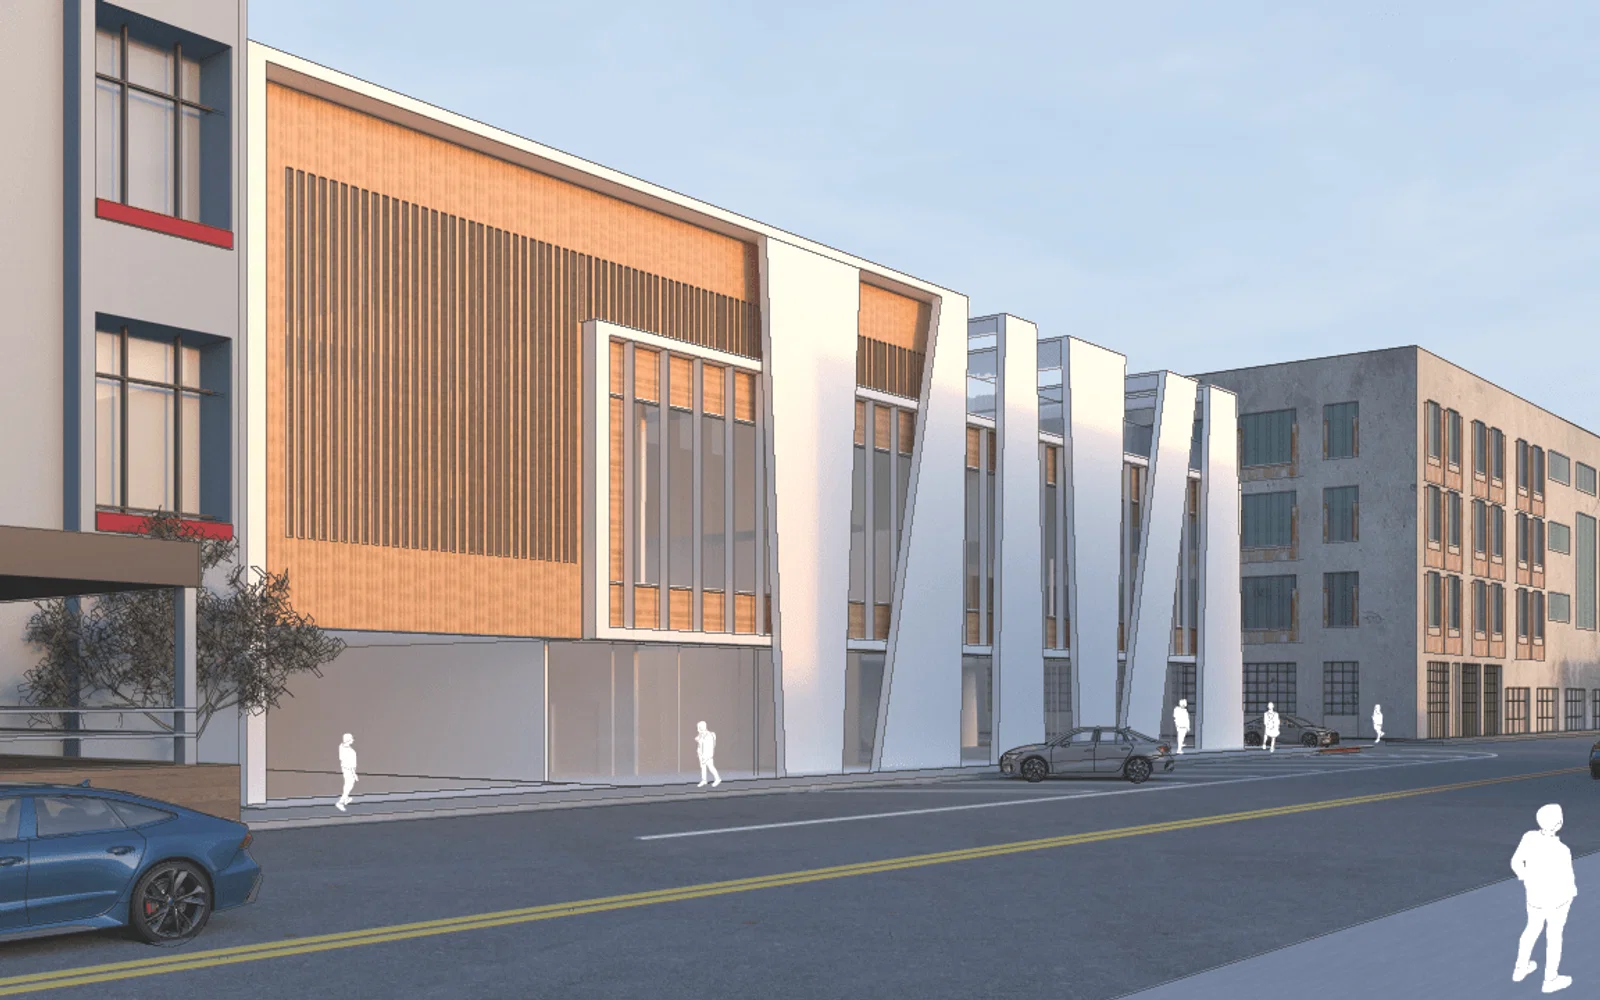 Final render of the design situated on the site.